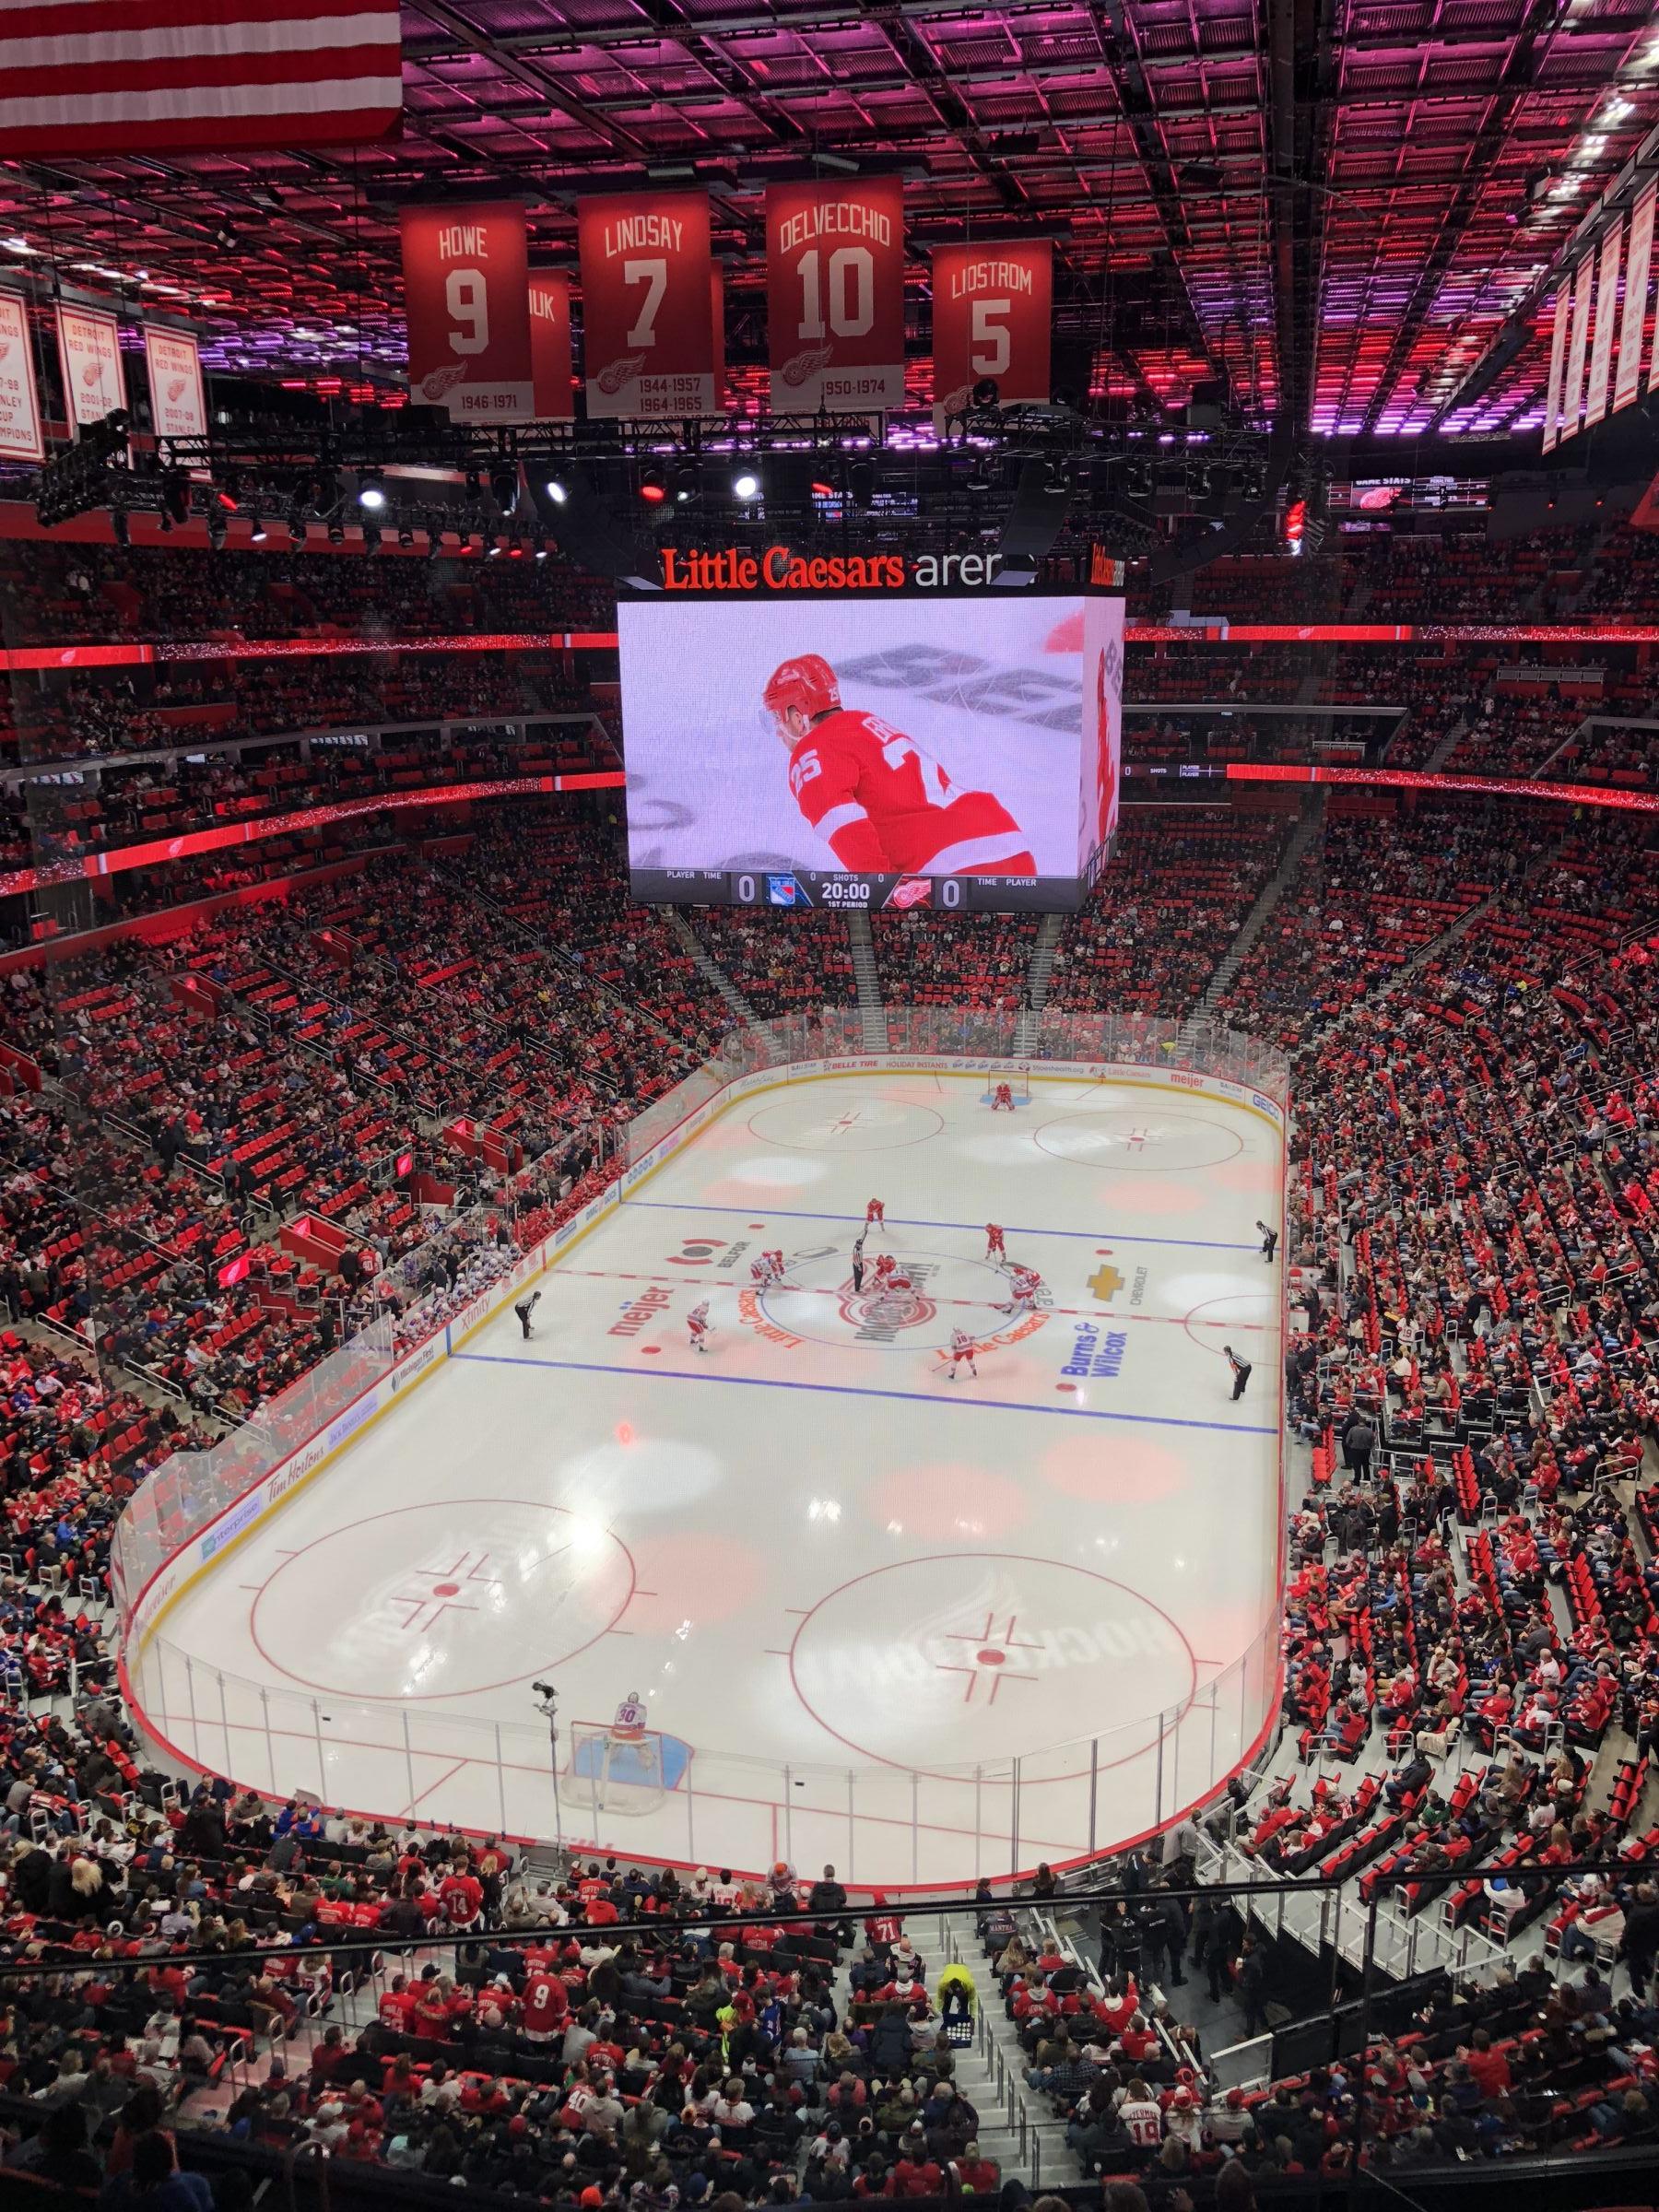 section 218, row 2 seat view  for hockey - little caesars arena